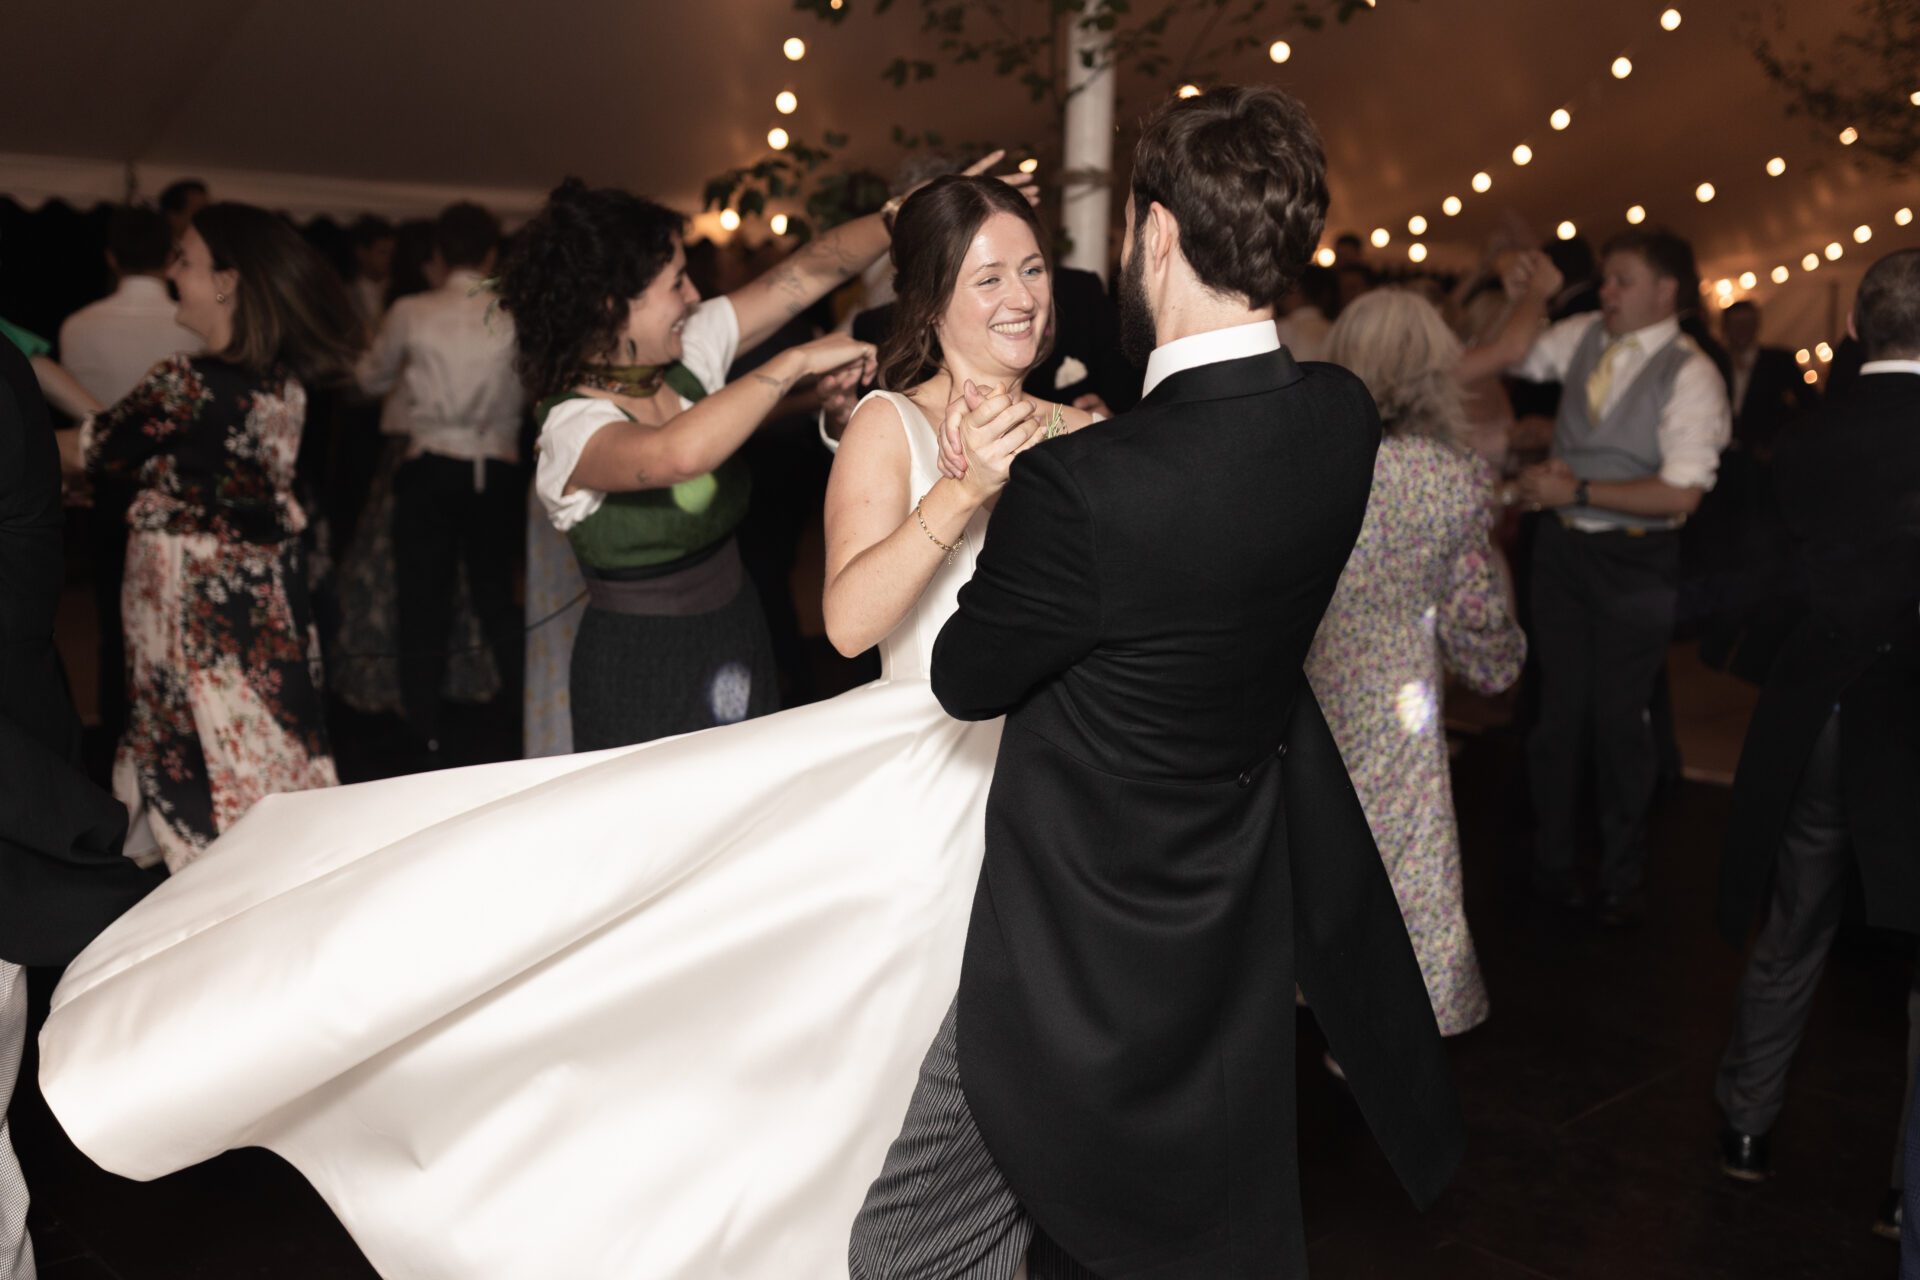 The bride and groom dance at their Somerset marquee wedding